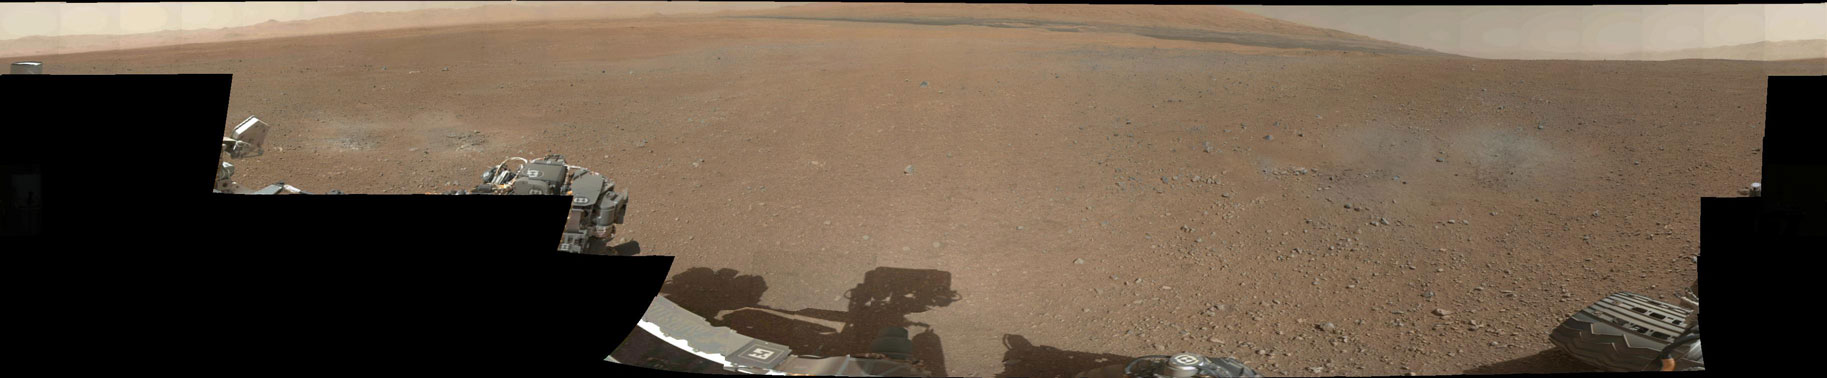 MSL's landing spot in Gale Crater